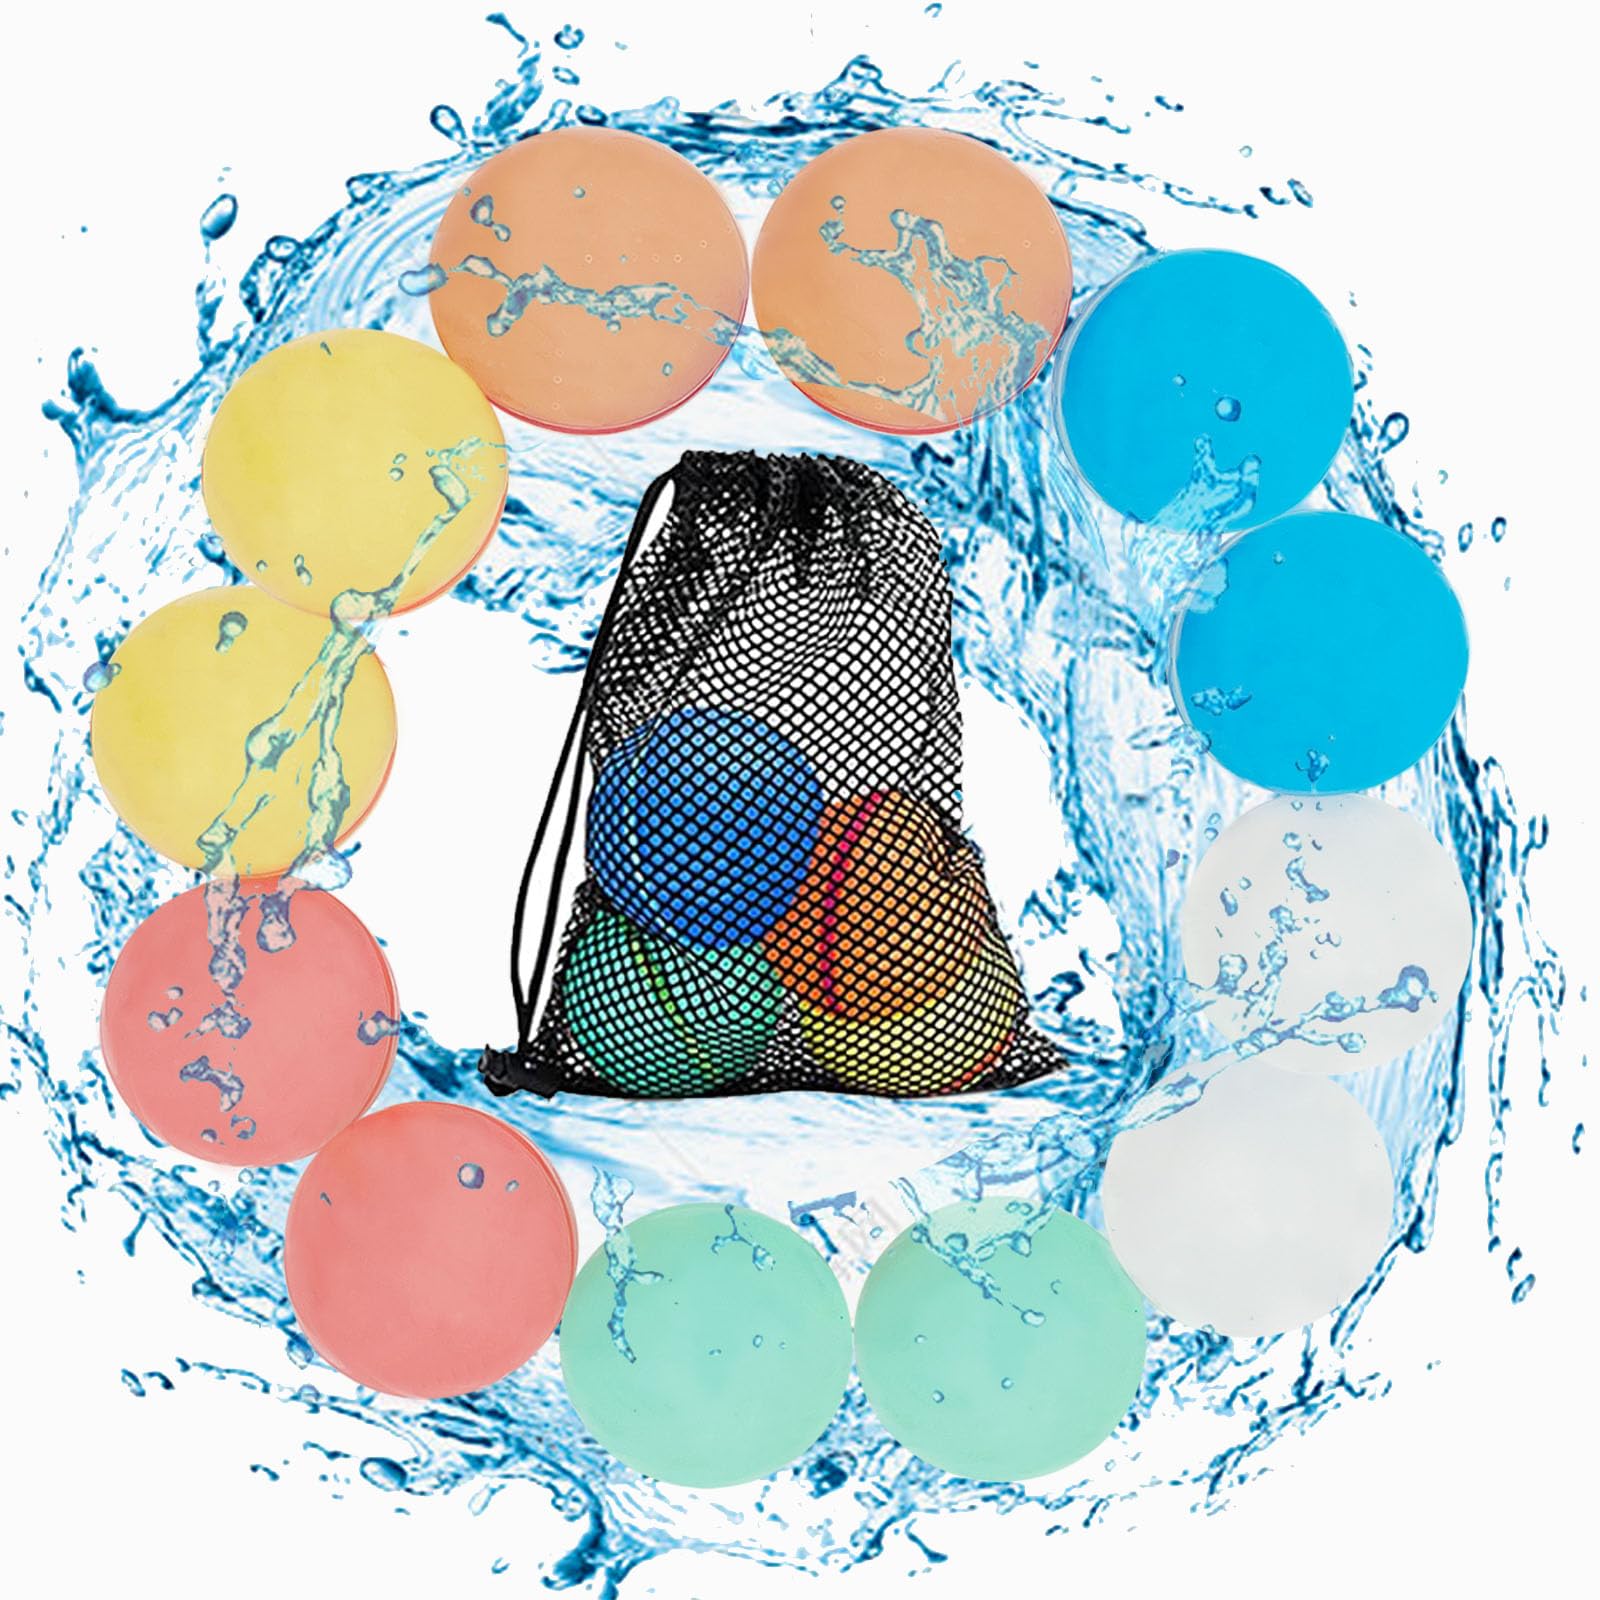 MSTOKIN 12 Pack Reusable Water Balloons for Kids, Quick Fill Water Balloon Toys for Outdoor Activities, Refillable Self Sealing Magnetic Close Water Balloon Balls for Summer Party Gift